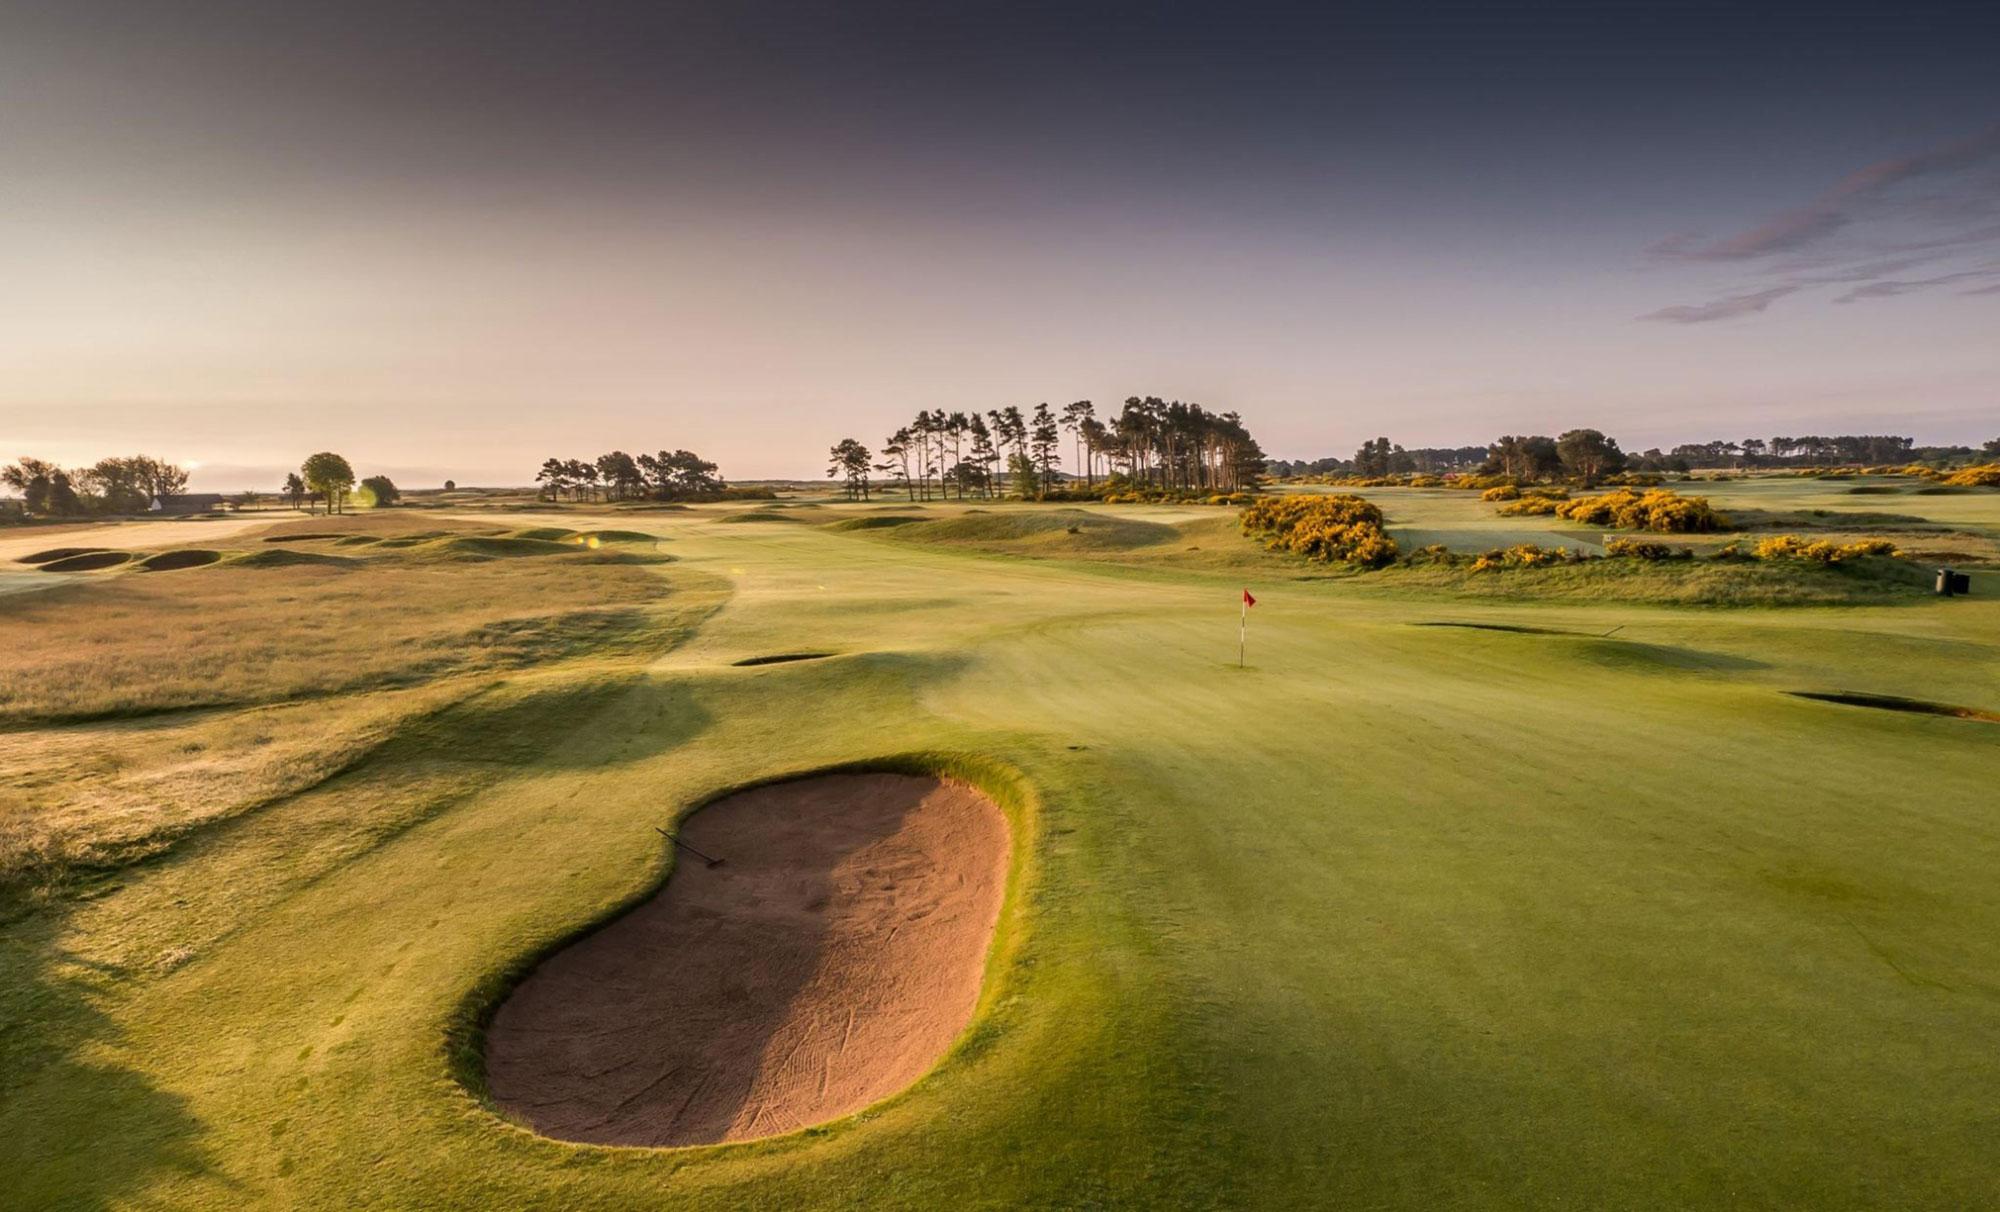 View Carnoustie Golf Links's picturesque golf course situated in incredible Scotland.